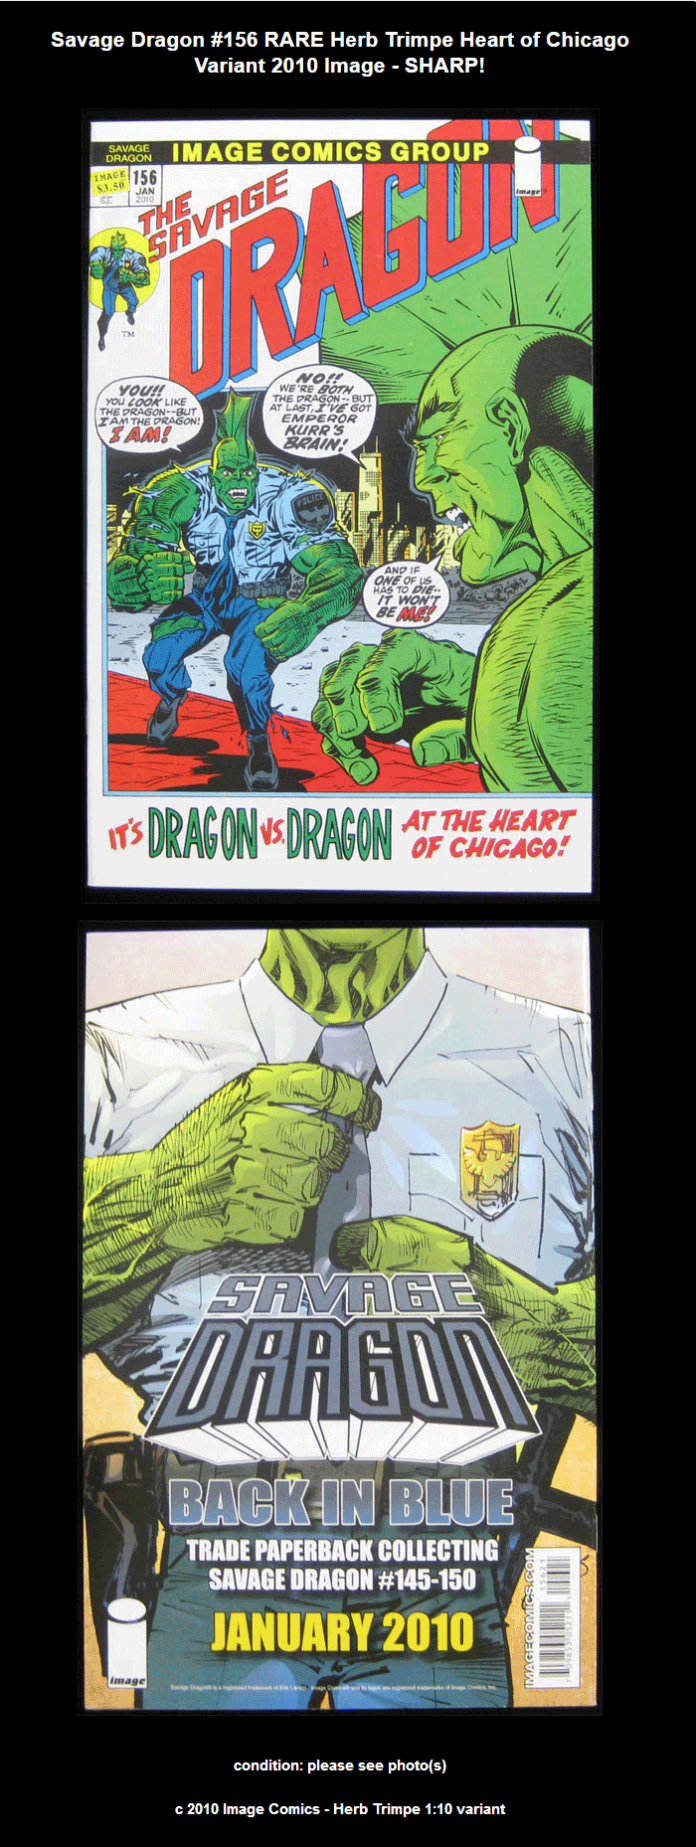 Savage Dragon #156 recent listing with front and back cover scans.